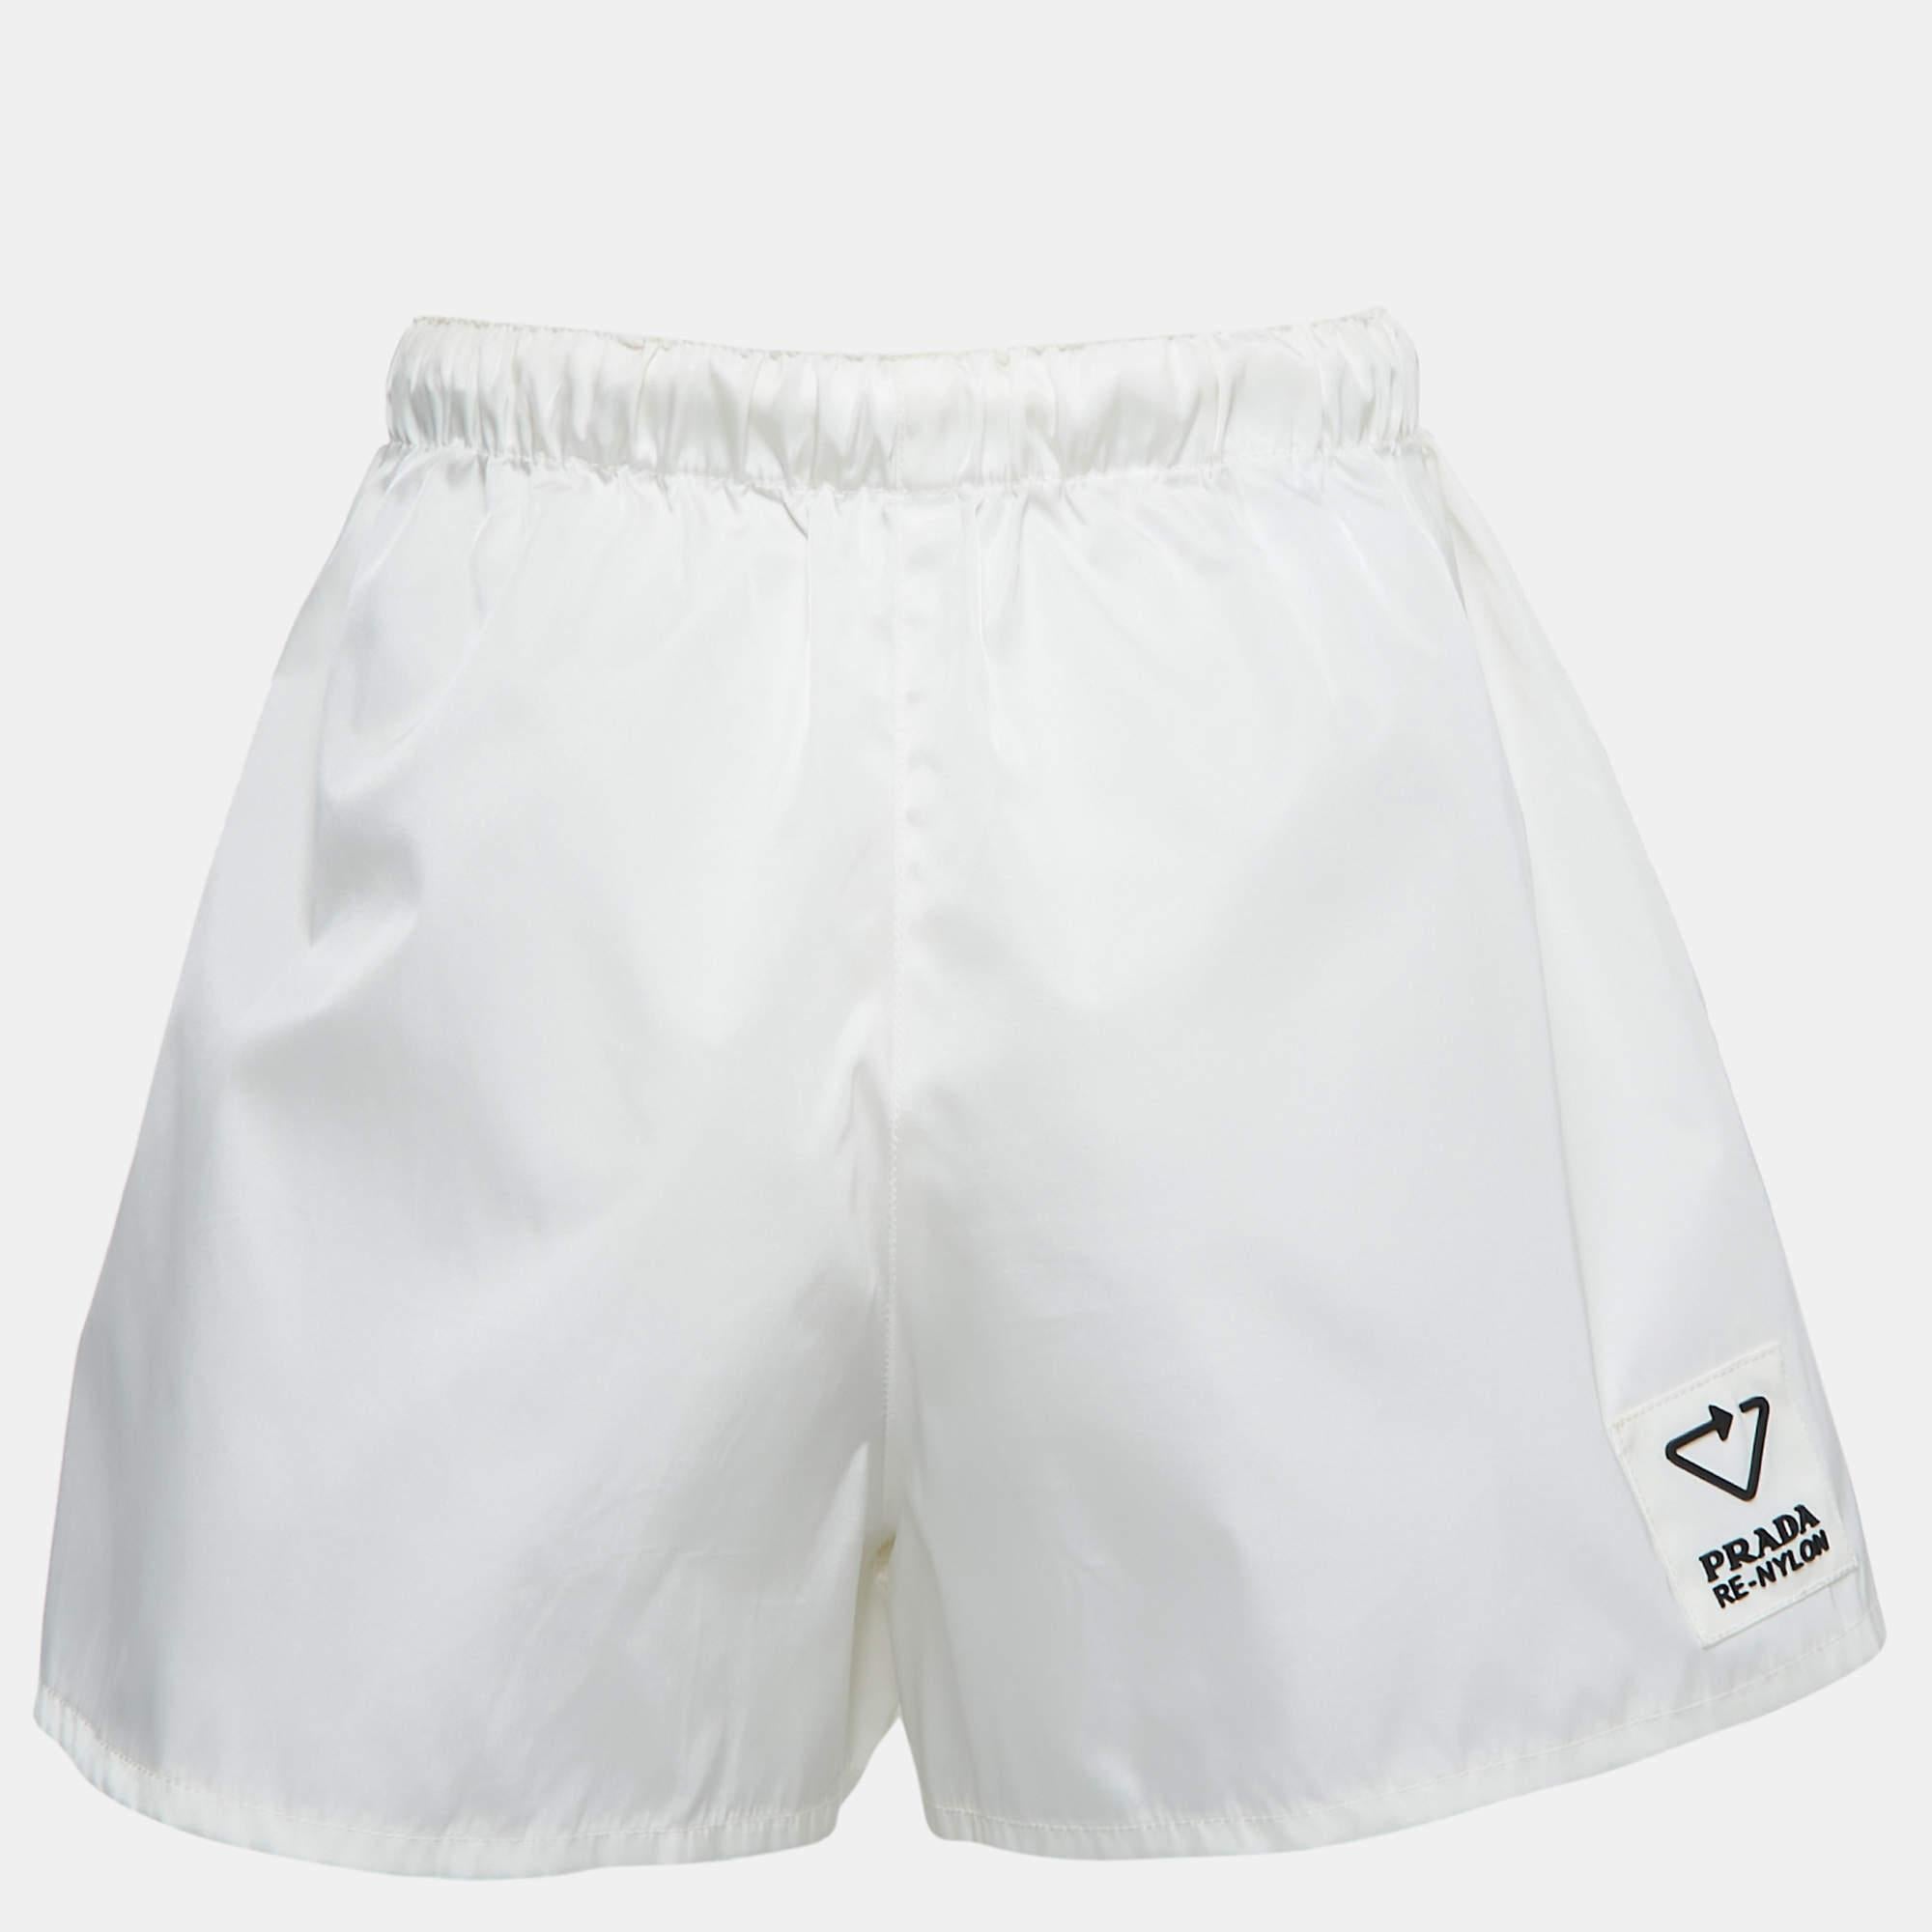 Beachy vacations call for a cute pair of shorts like this. Stitched using high-quality fabric, this pair of shorts is styled with classic details and has a superb length. Wear it with T-shirts.

